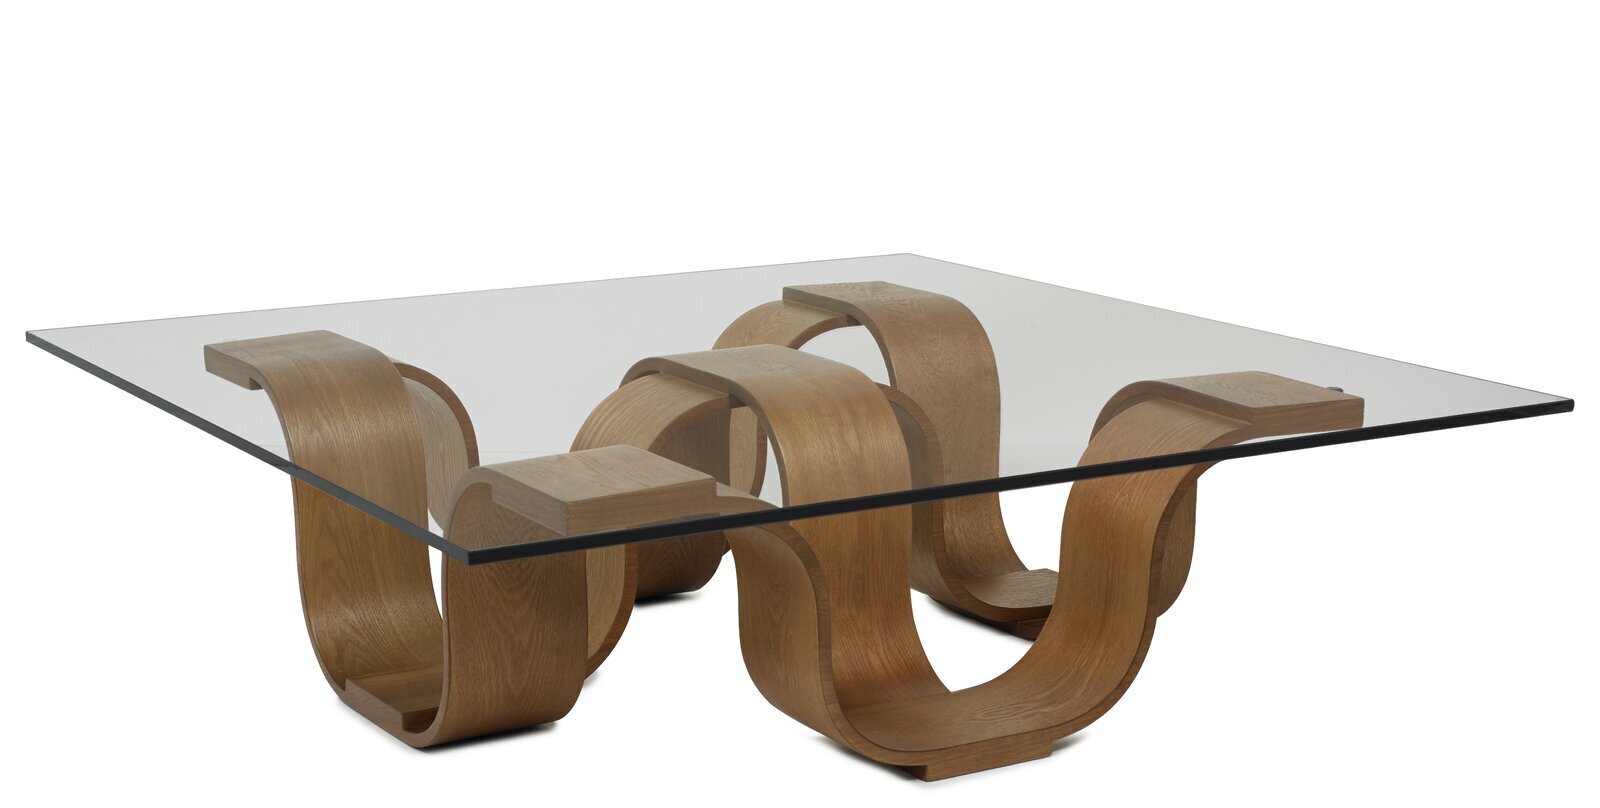 Abstract Large Square Glass Coffee Table